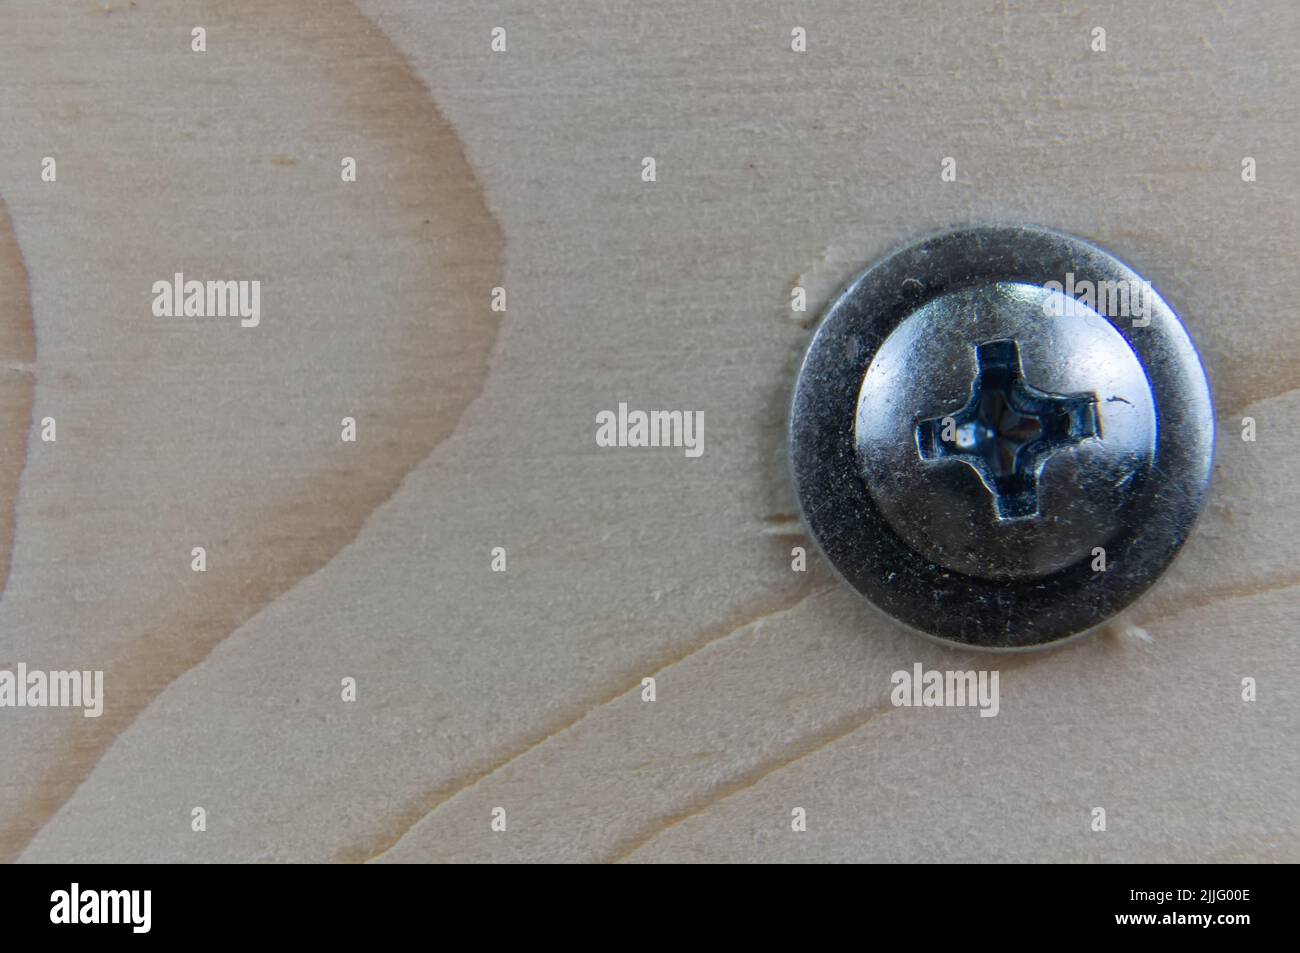 Close-up of the head of a galvanized self-tapping screw with a press washer, screwed into a wooden board. Phillips type slot - PH. Place for text or l Stock Photo